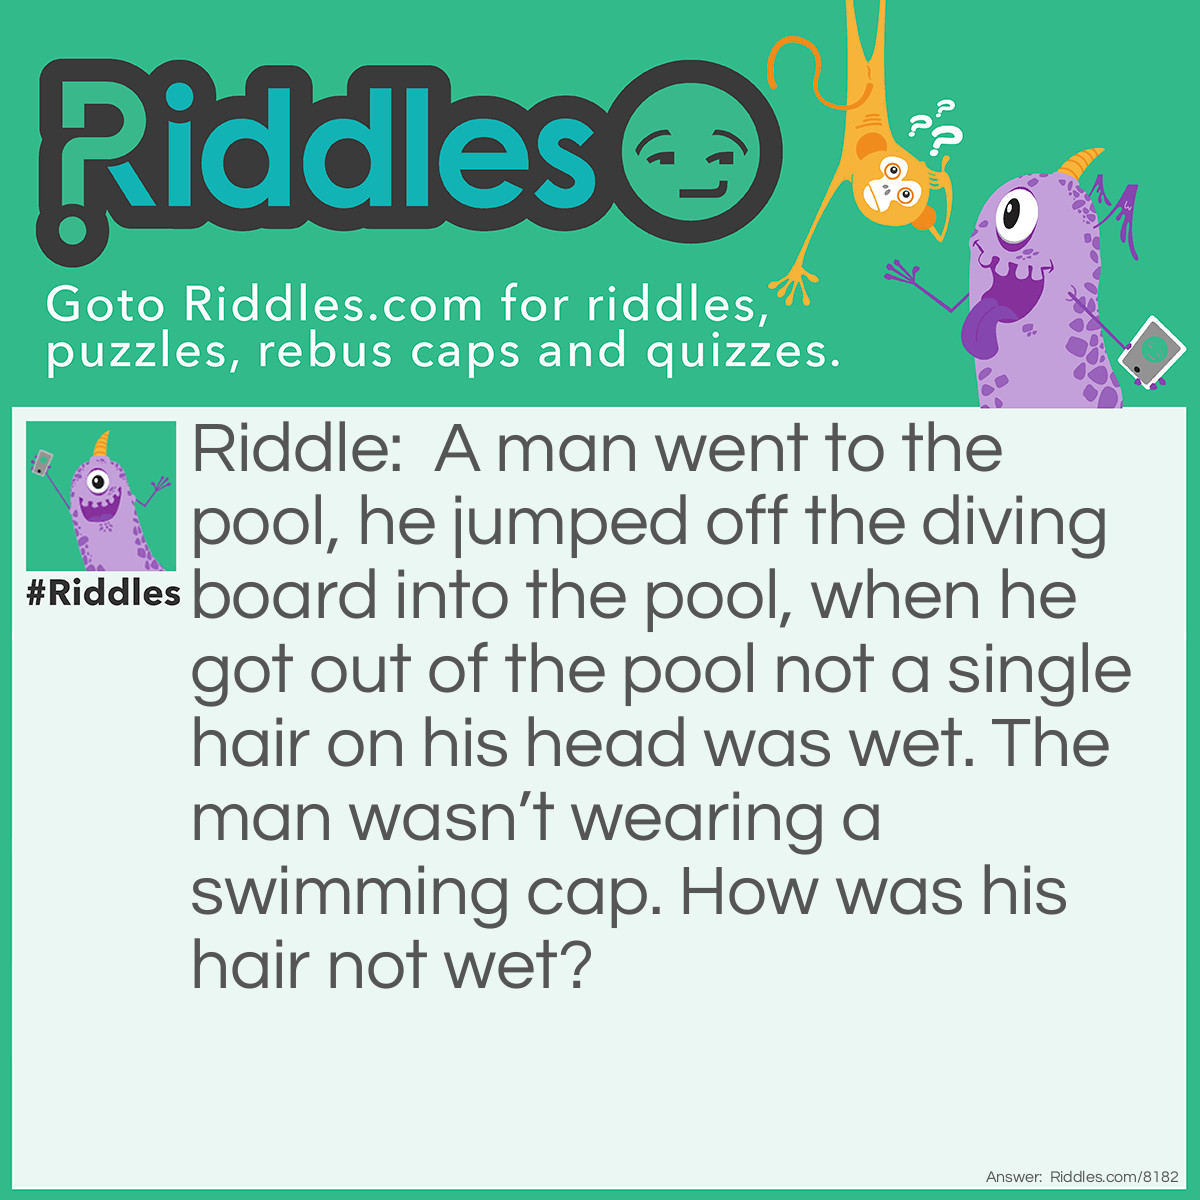 Riddle: A man went to the pool, he jumped off the diving board into the pool, when he got out of the pool not a single hair on his head was wet. The man wasn't wearing a swimming cap. How was his hair not wet? Answer: That man was bald.